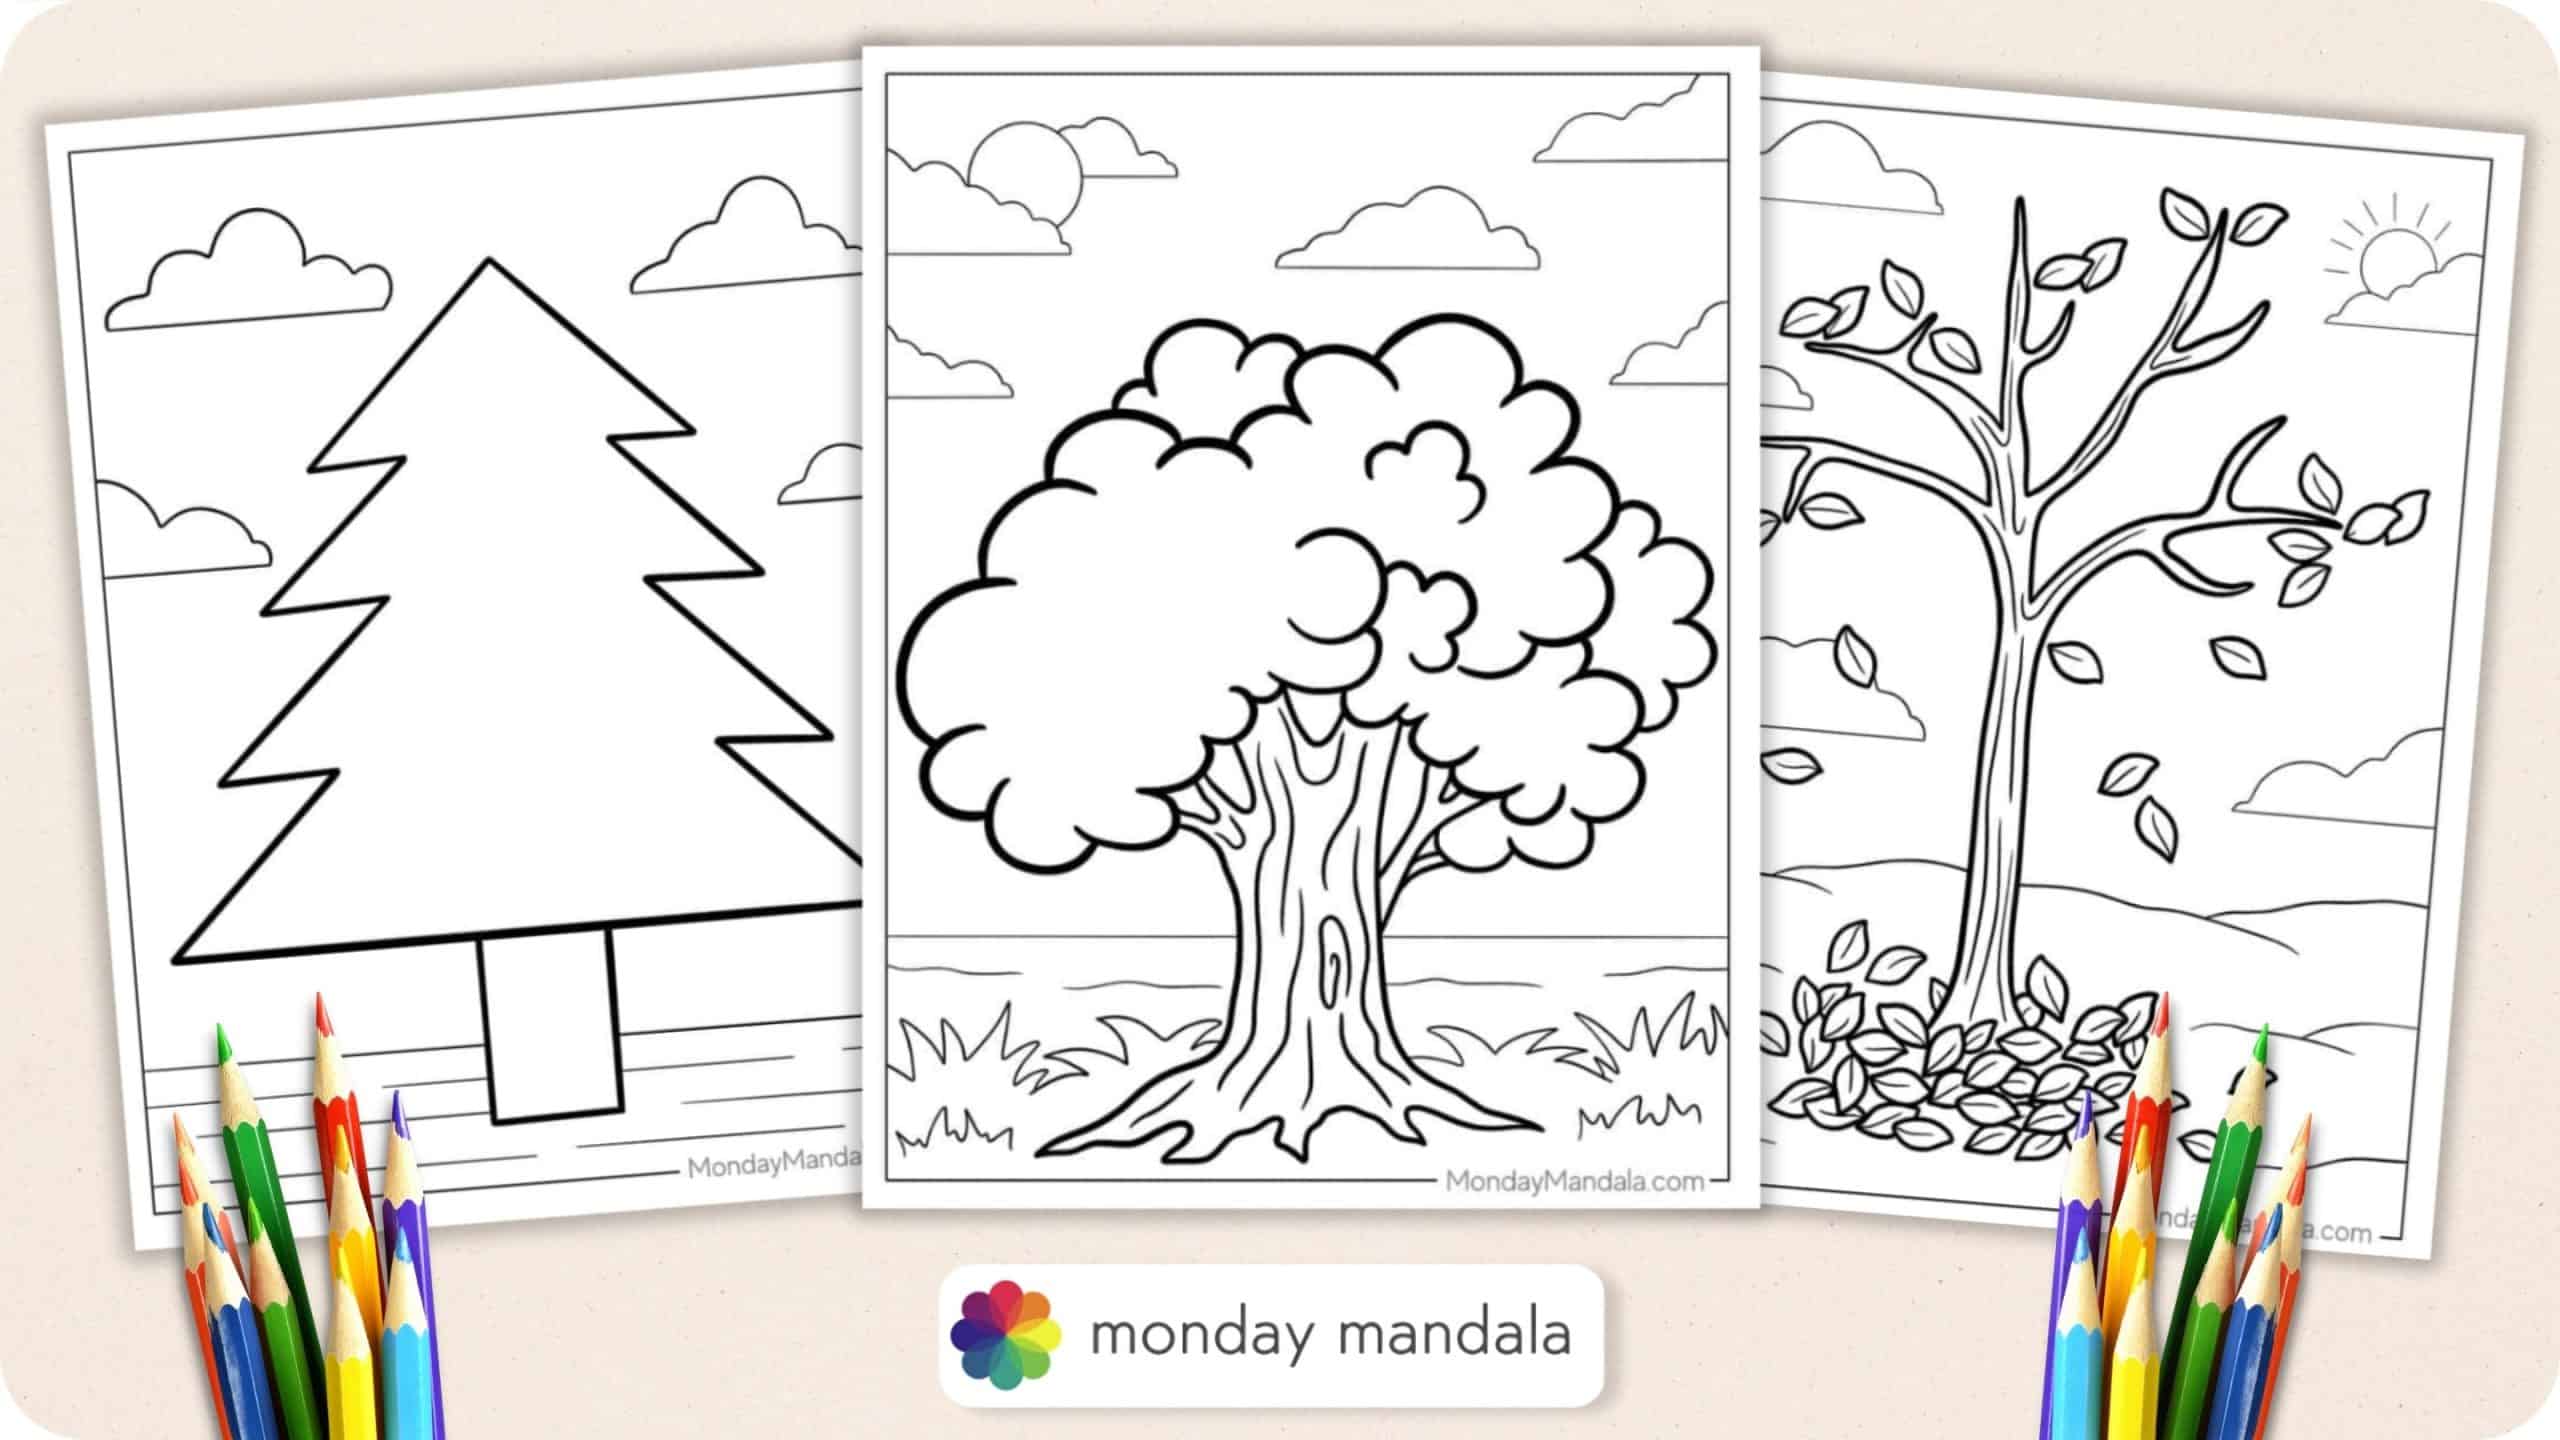 Tree coloring pages free pdf printables